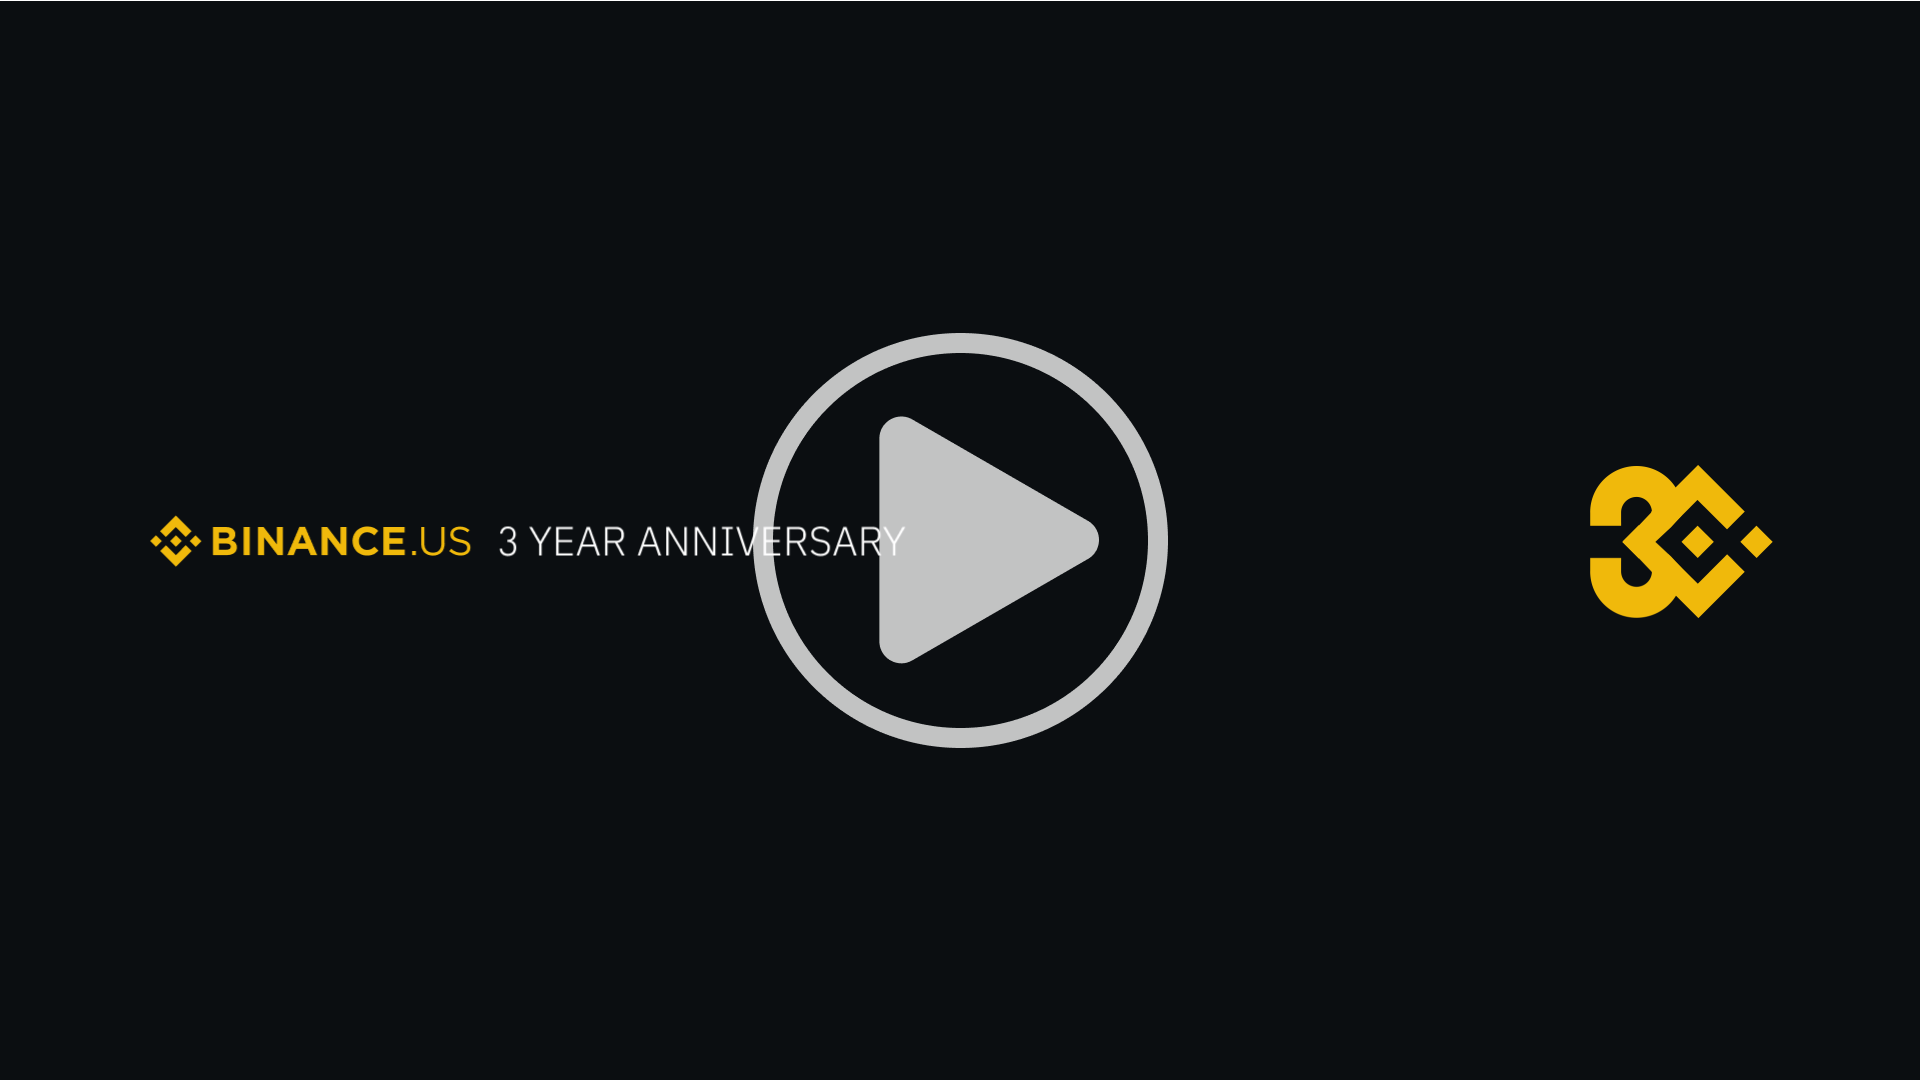 Meet the Best Crypto Platform for Low Fees | Binance.US 3 Year Anniversary Video